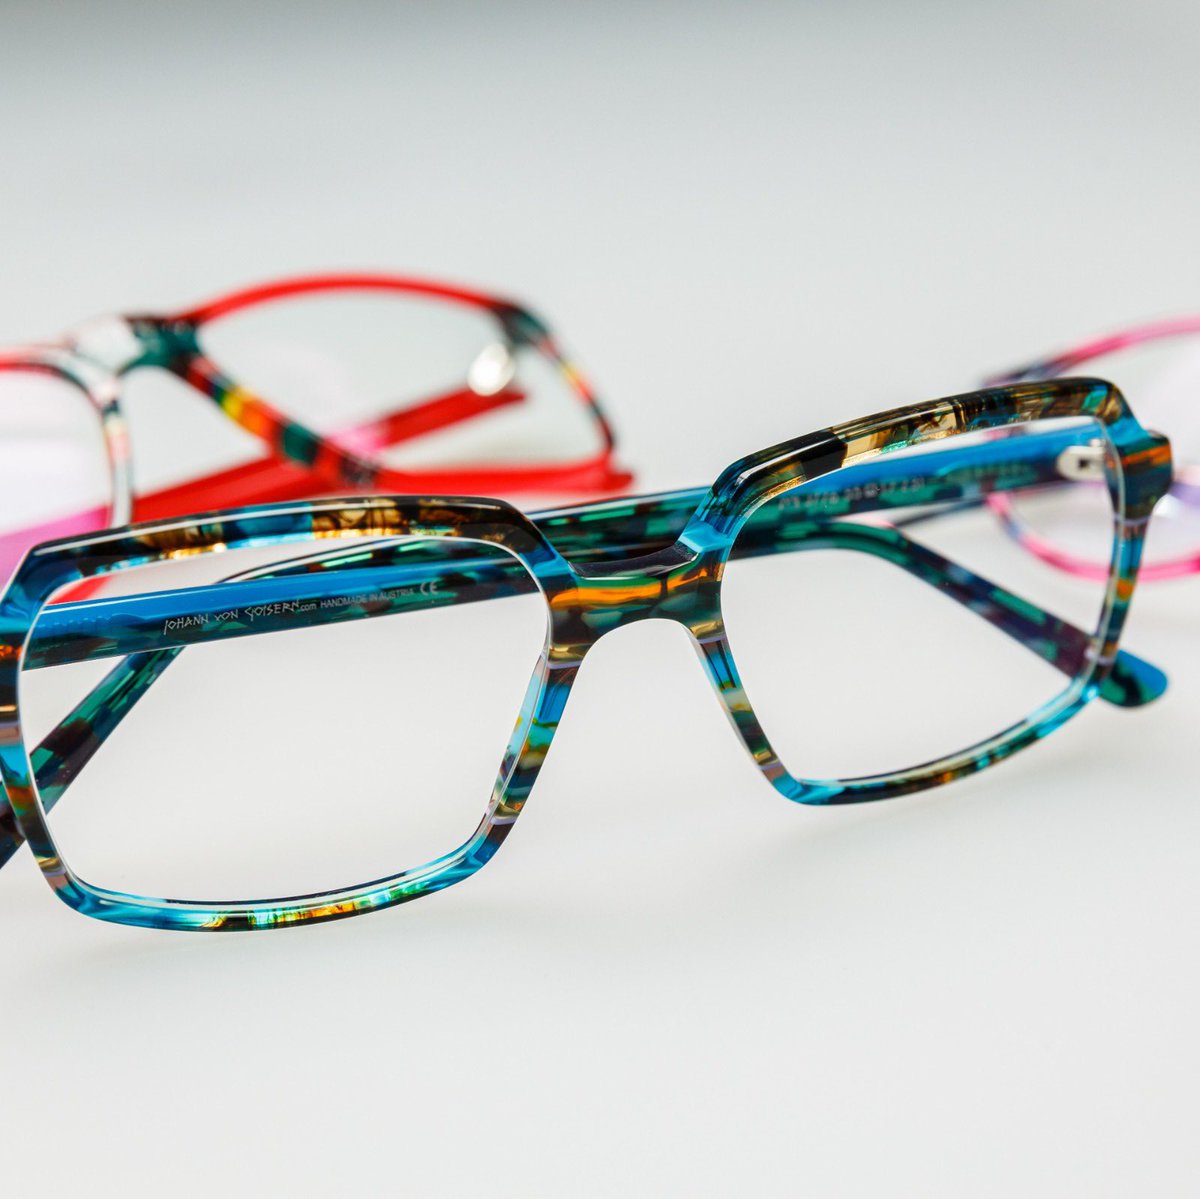 Spring-like green, blues and yellows alternate with an eye-catching pattern. The neutral shape is not distracting and generously supports this sea of colours. 🥰🥰

#colorinspiration #johannvongoisern #daretobedifferent #opticians #framelover #eyewear #eyeweardesign #opticamodelo